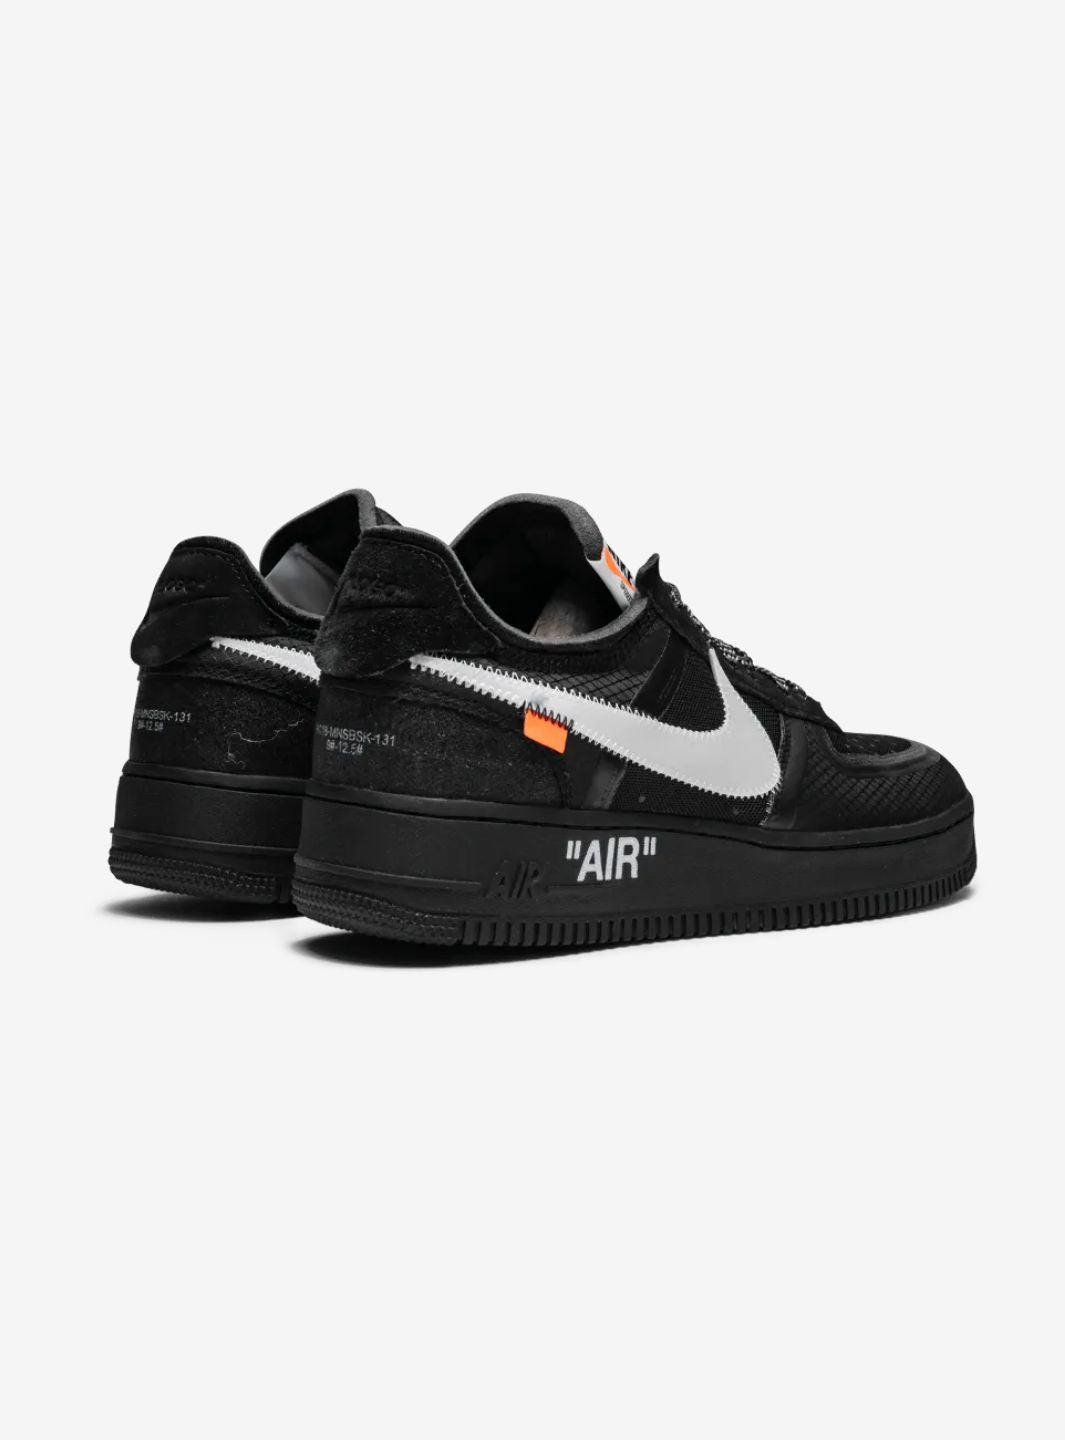 Nike Air Force 1 Low Off-White Black White - AO4606-001 | ResellZone